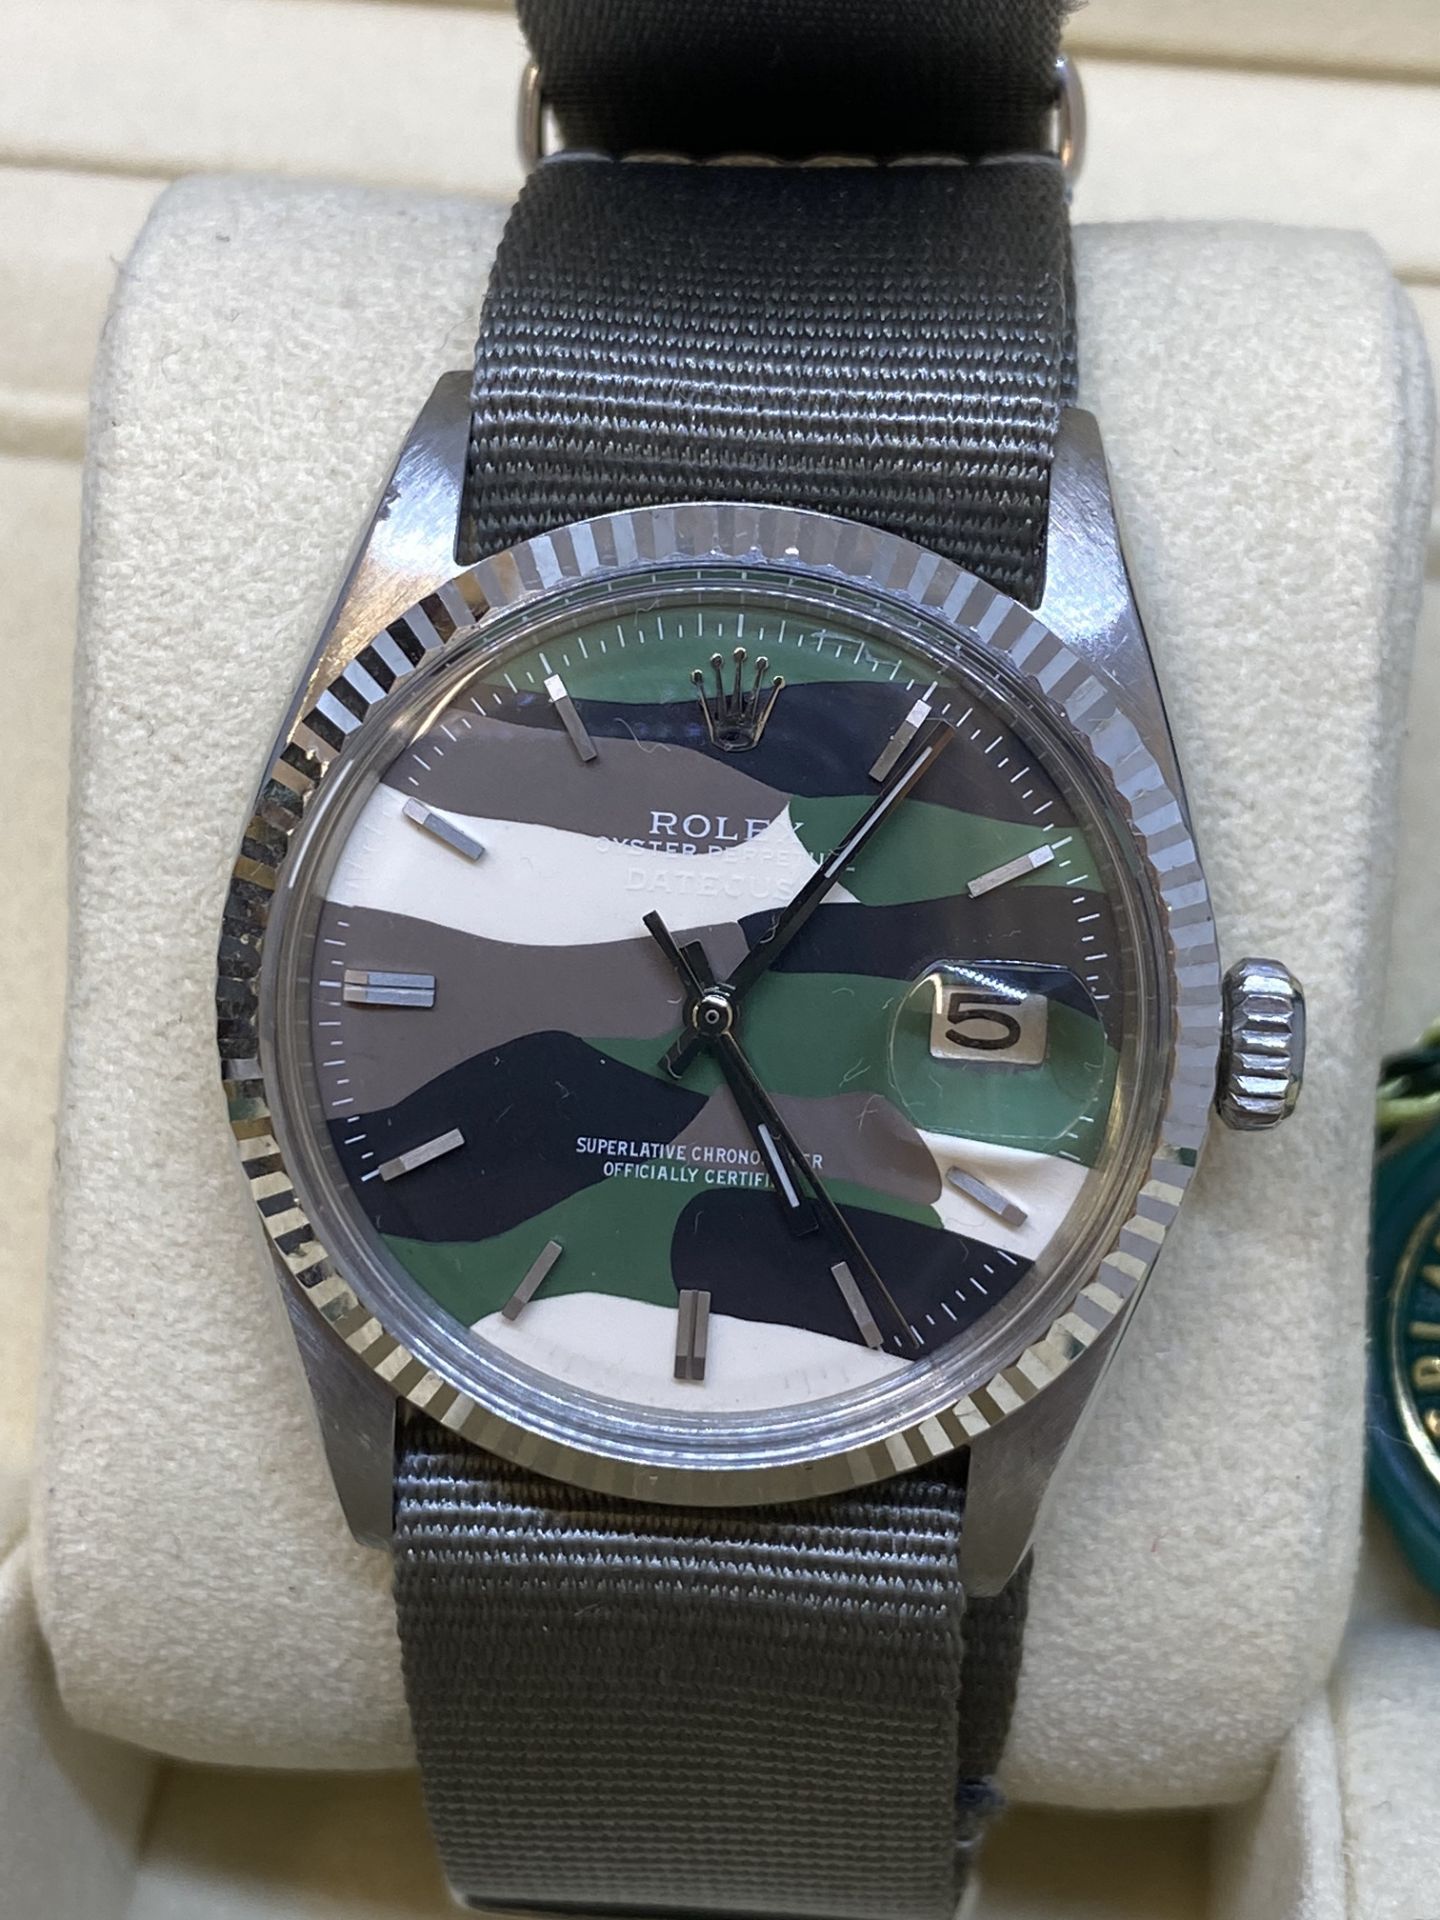 Rolex Stainless Steel with Gold Bezel - Camouflage Dial - Image 2 of 14